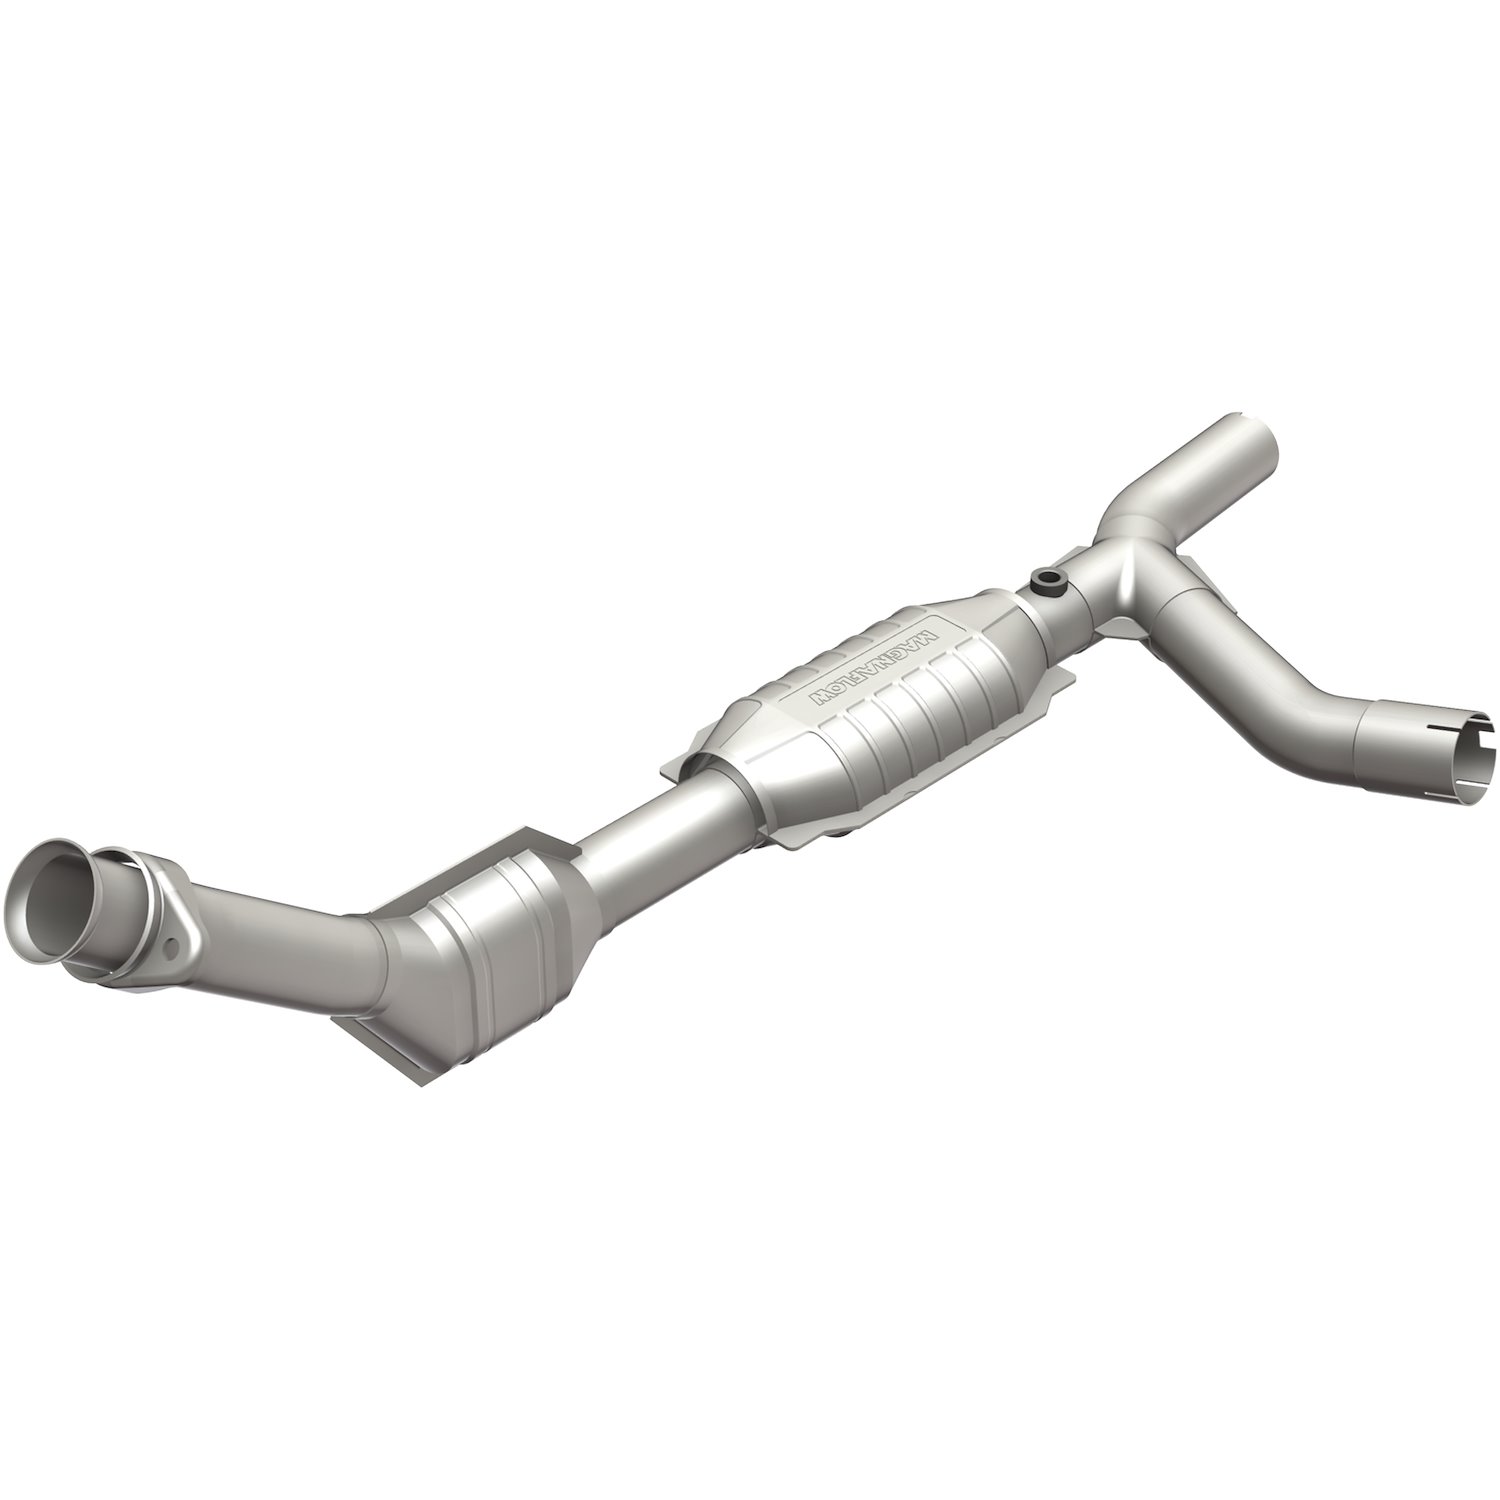 OEM Grade Federal / EPA Compliant Direct-Fit Catalytic Converter 49426